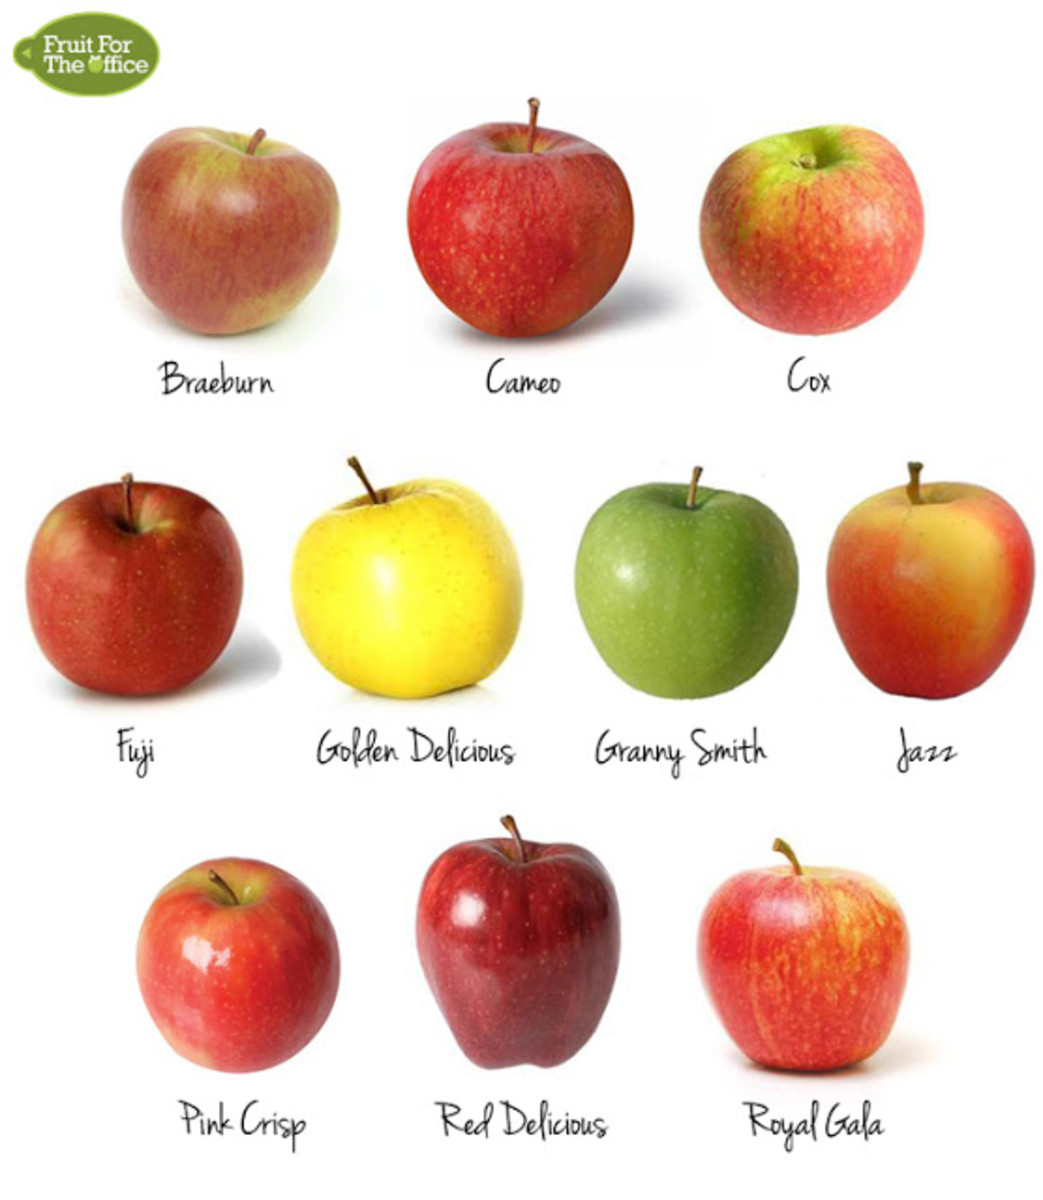 Apples are full of nutrition and more beneficial when bought organic